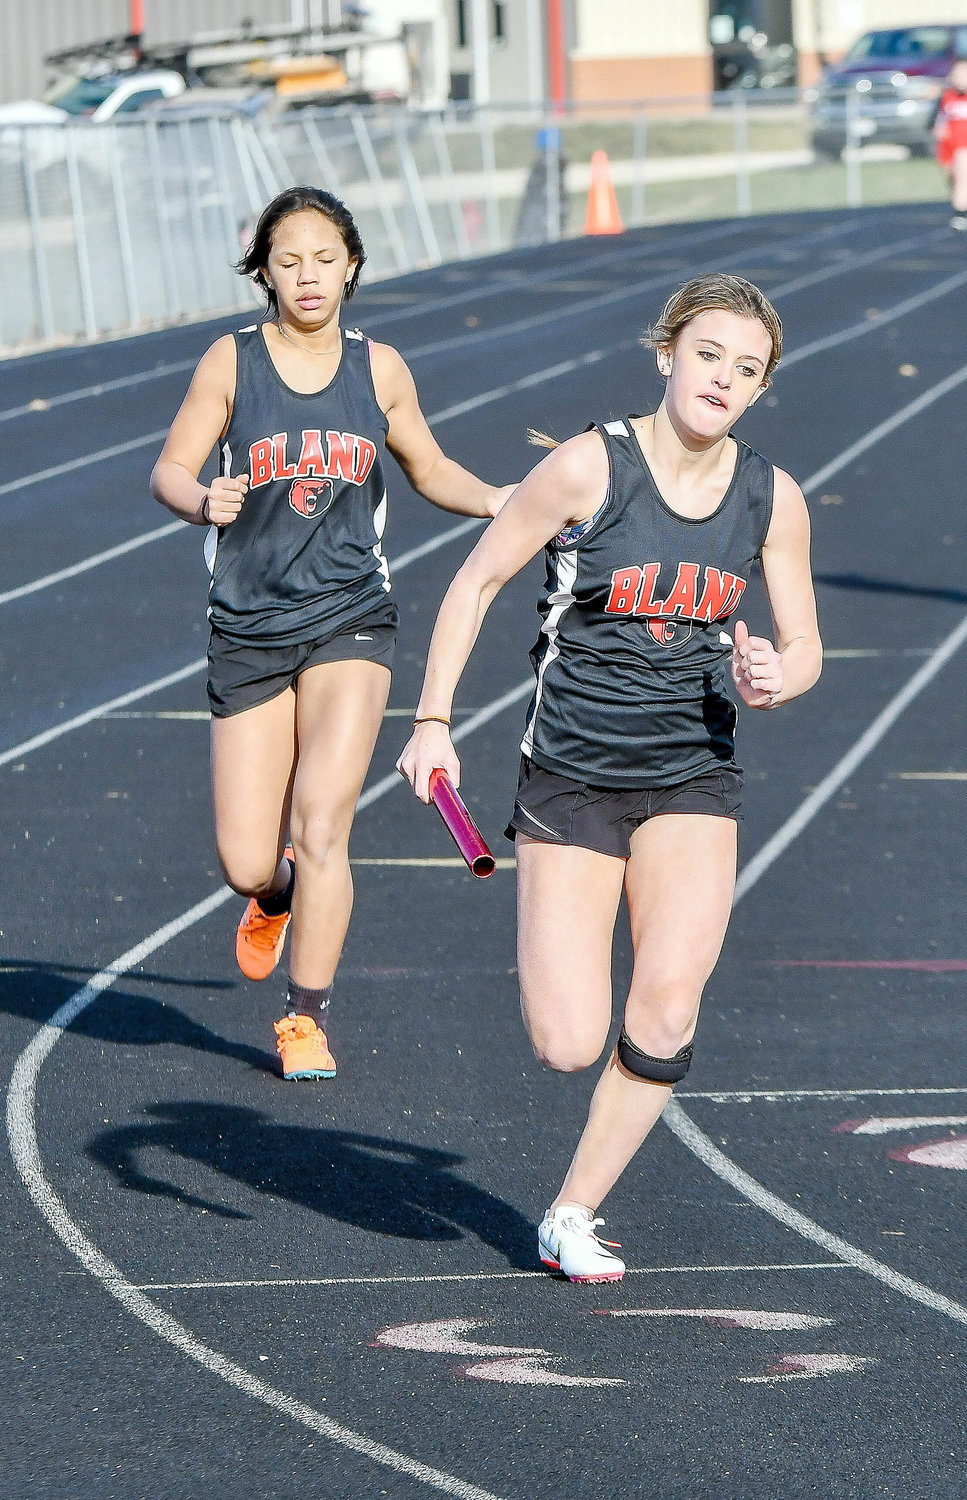 Nolie Finnegan (far right) takes the baton from Piper Marsee for Bland’s Lady Bears during the girls 4200-meter relay in Osage County.